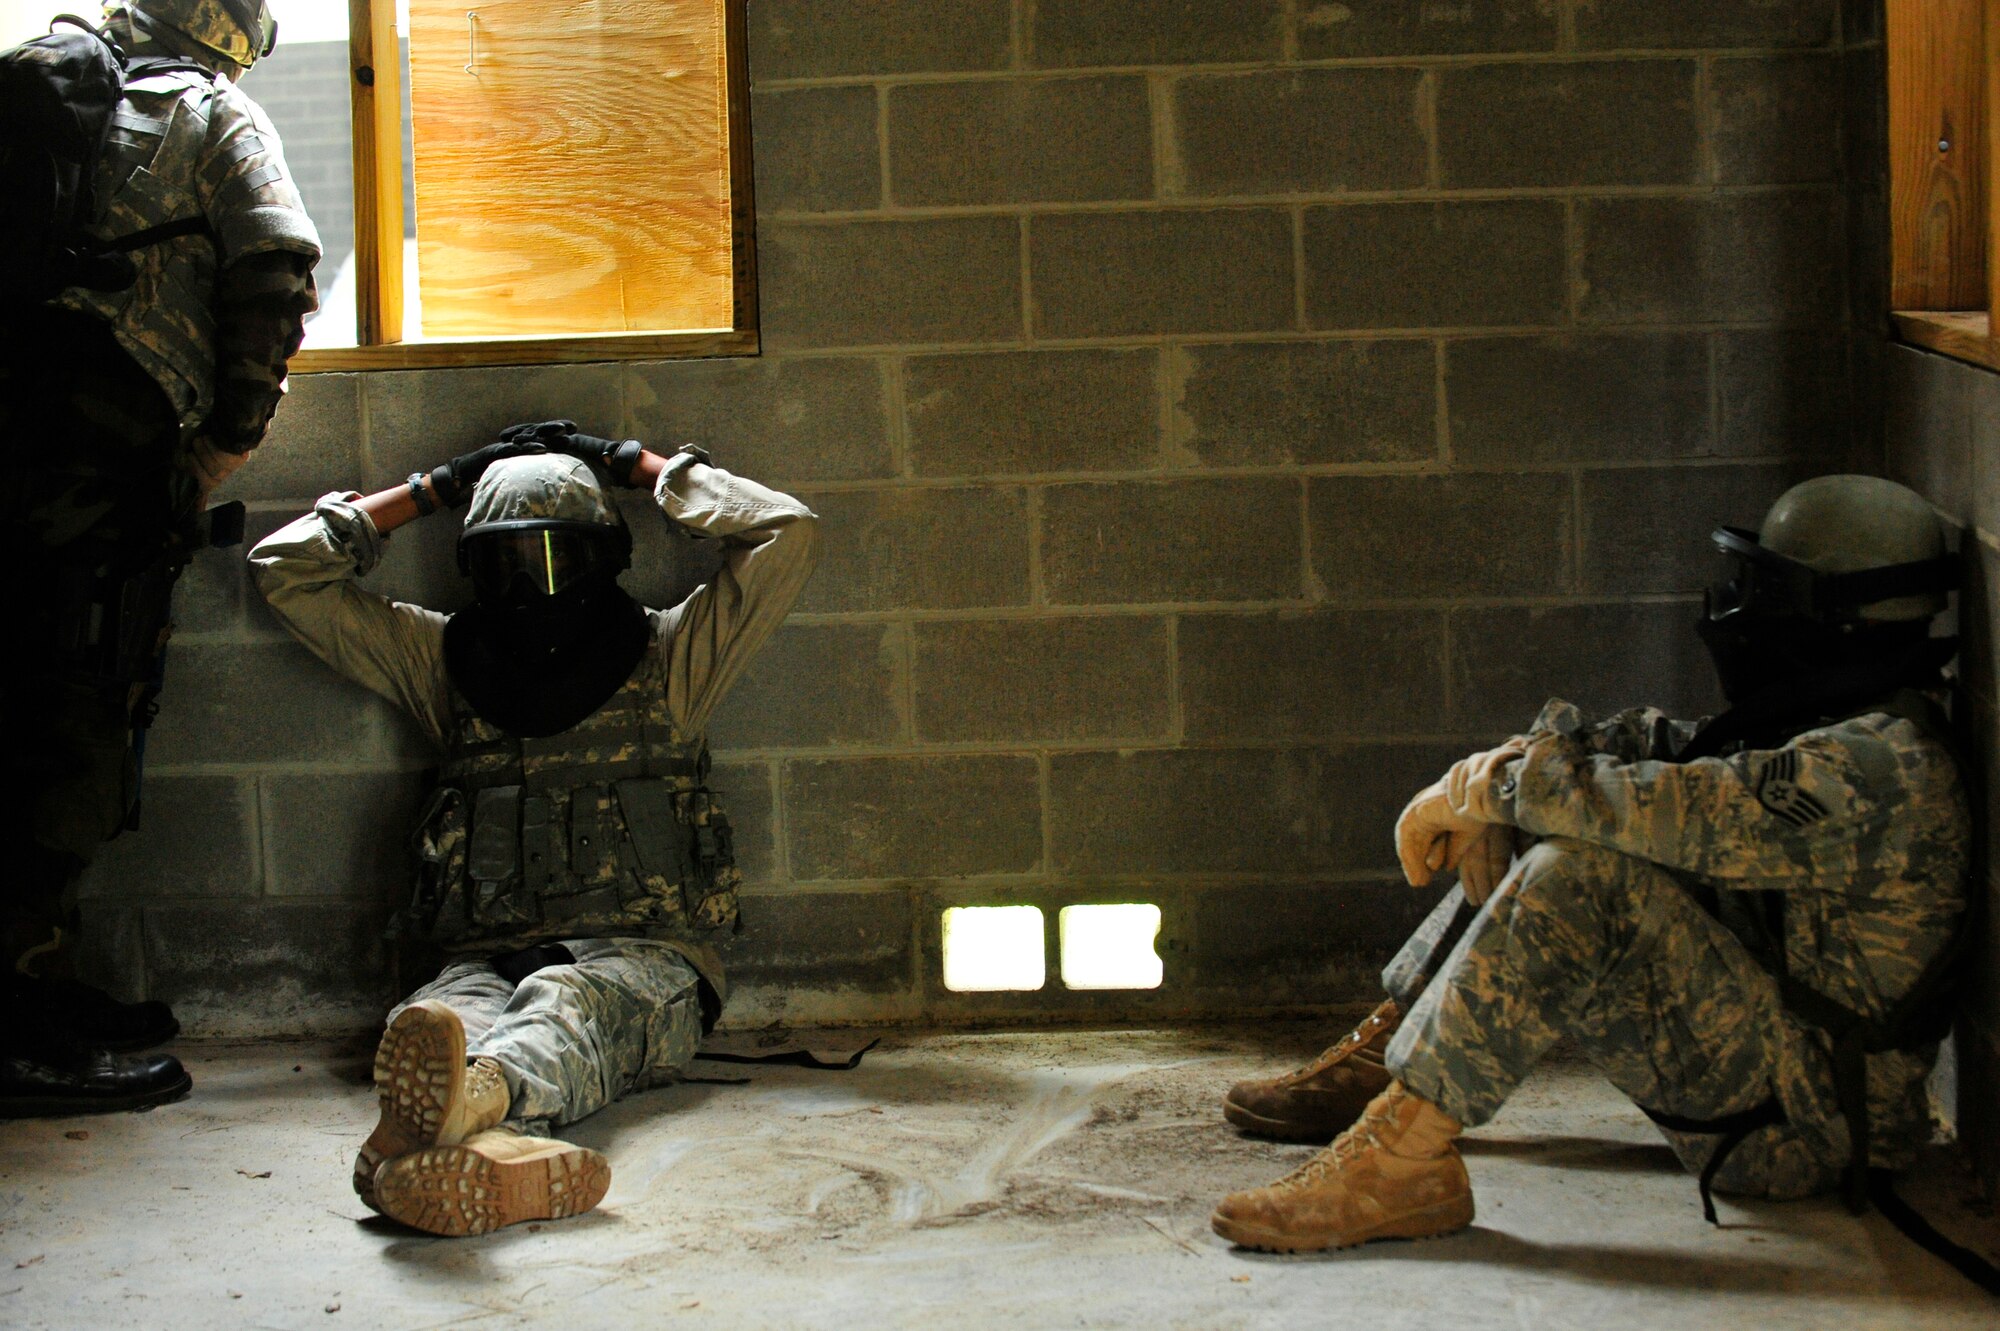 MOODY AIR FORCE BASE, Ga – Two simulated enemy prisoners of war sit under guard as Senior Master Sgt. Ron Hall, 820th Security Forces Group operations analysis superintendent, calls out to his team leader that the building has been secured during combat medical skills training here May 22. Airmen use real-world tactics when training to ensure they are able to handle real world combat stresses. (U.S. Air Force photo by Senior Airman Schelli Jones)
